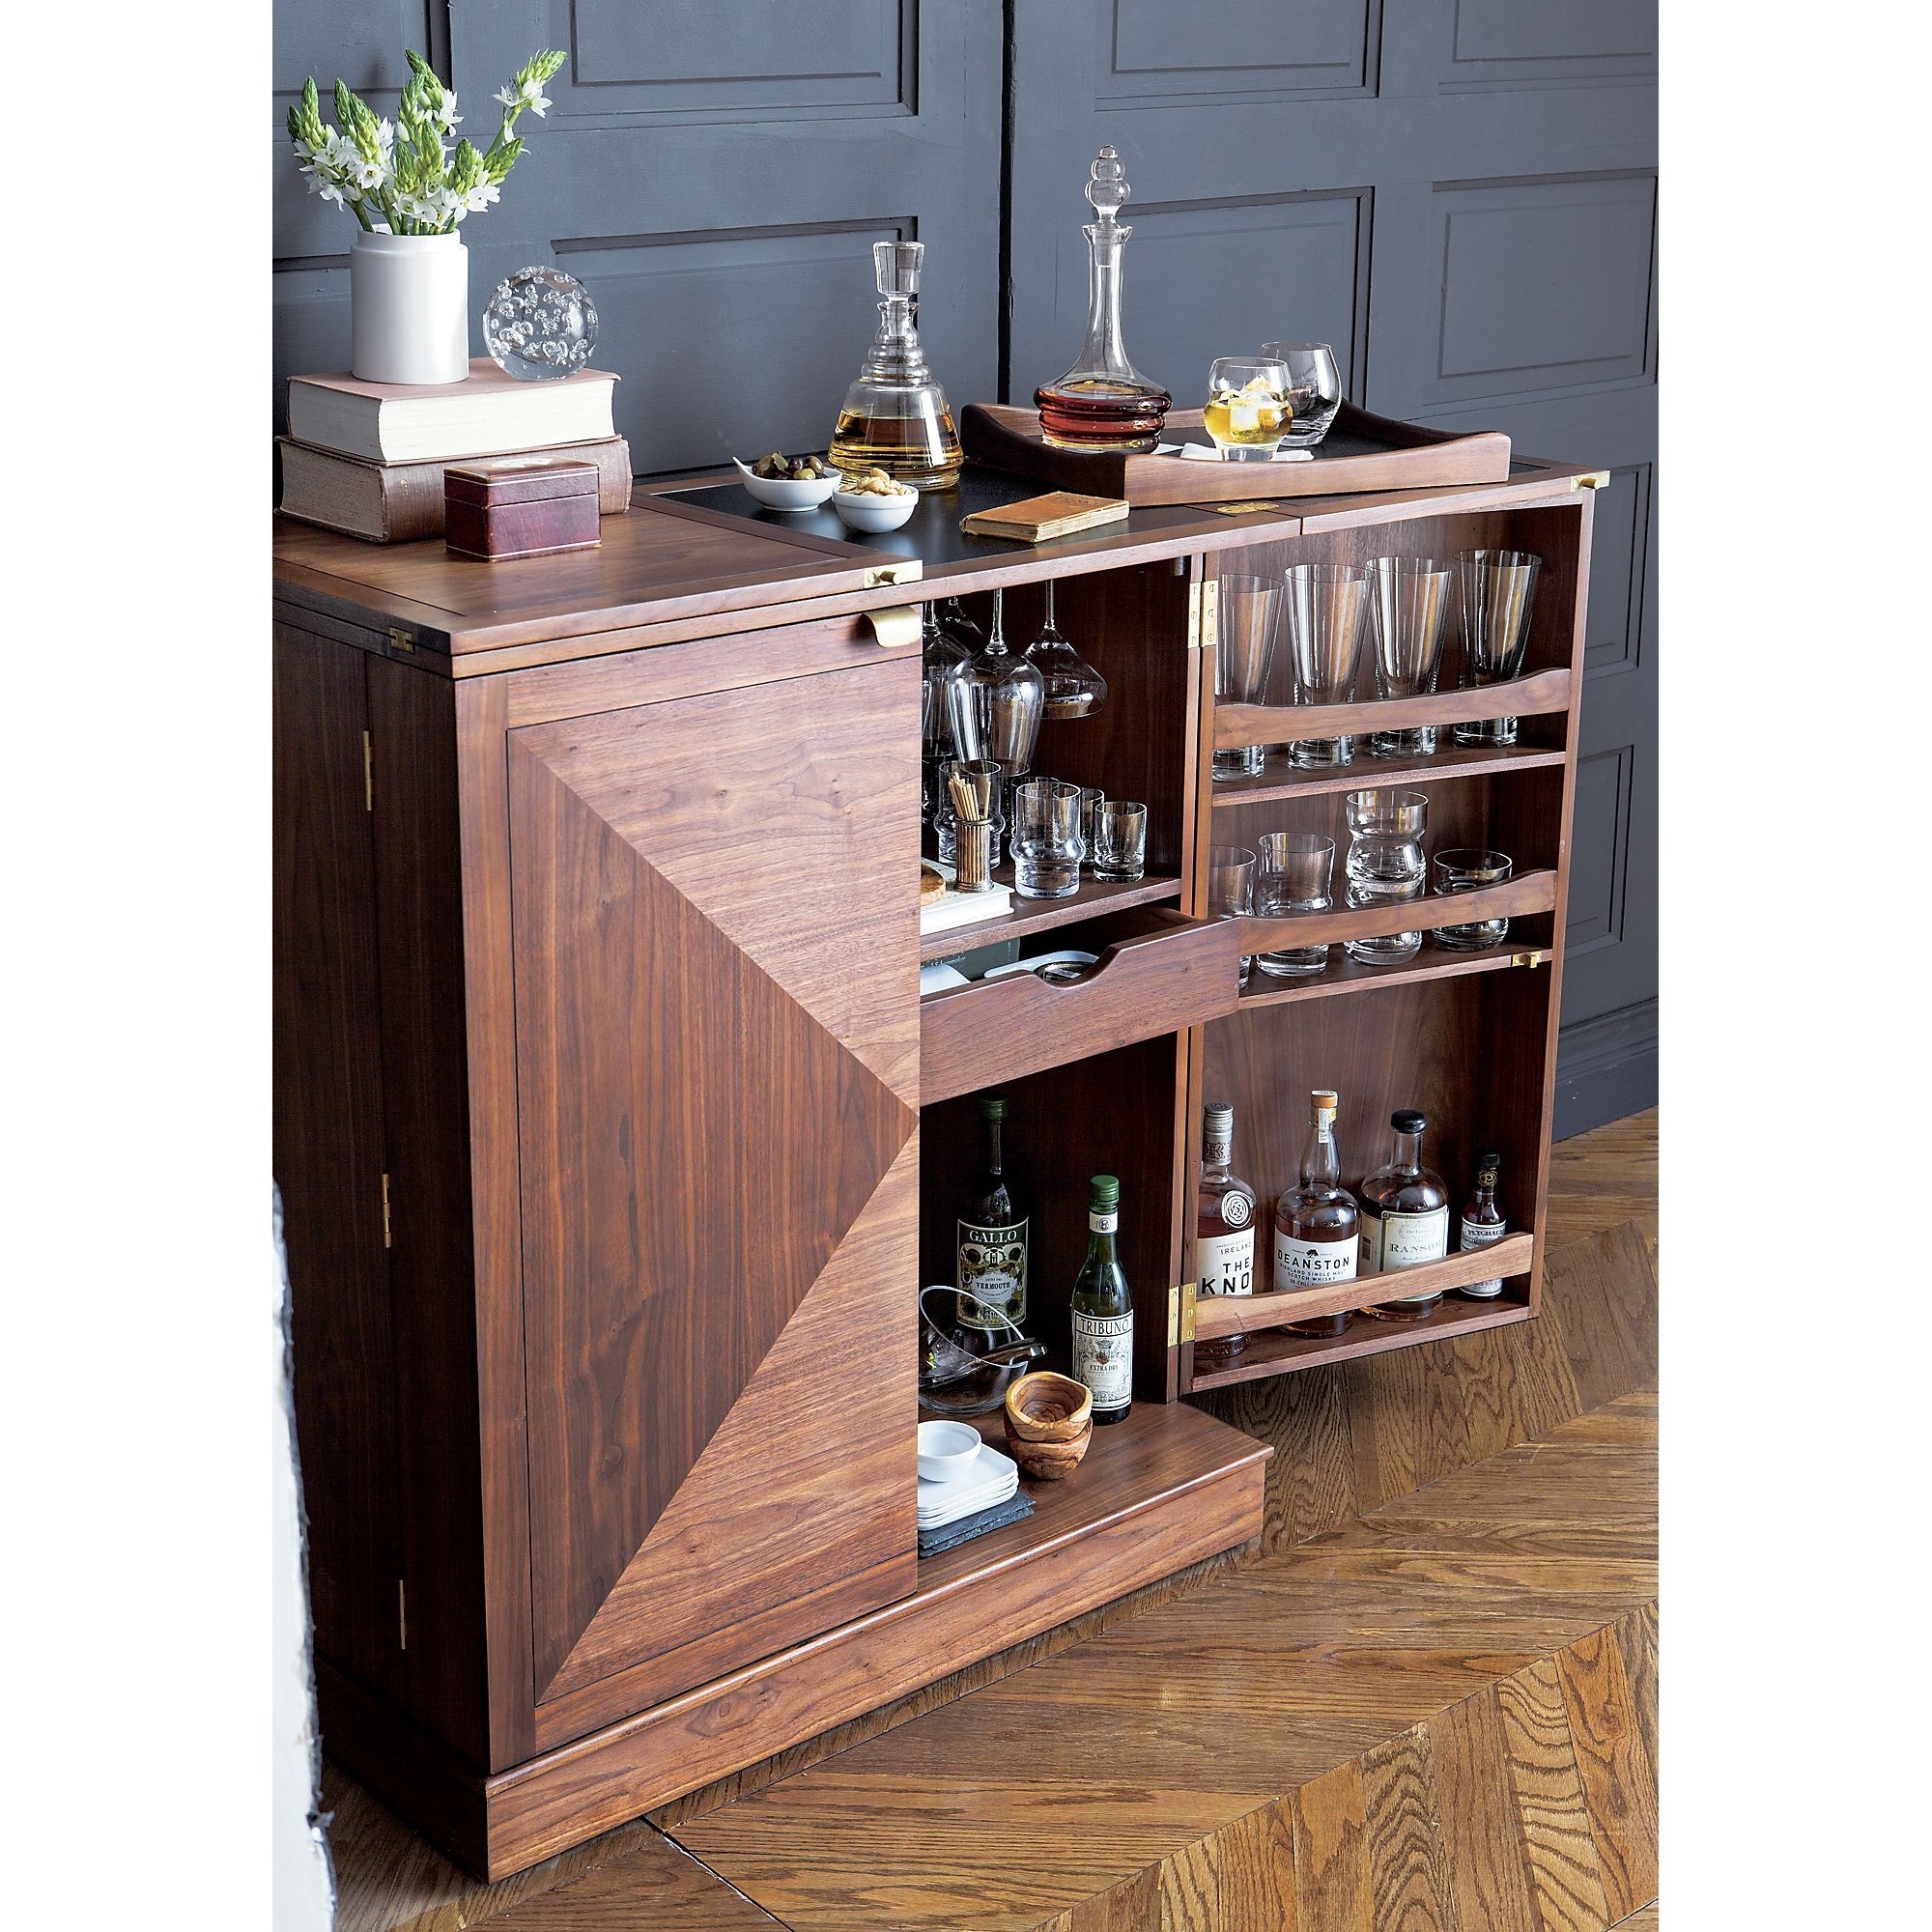 Mini Bar Ideas for Small-Space 'Happy Hour